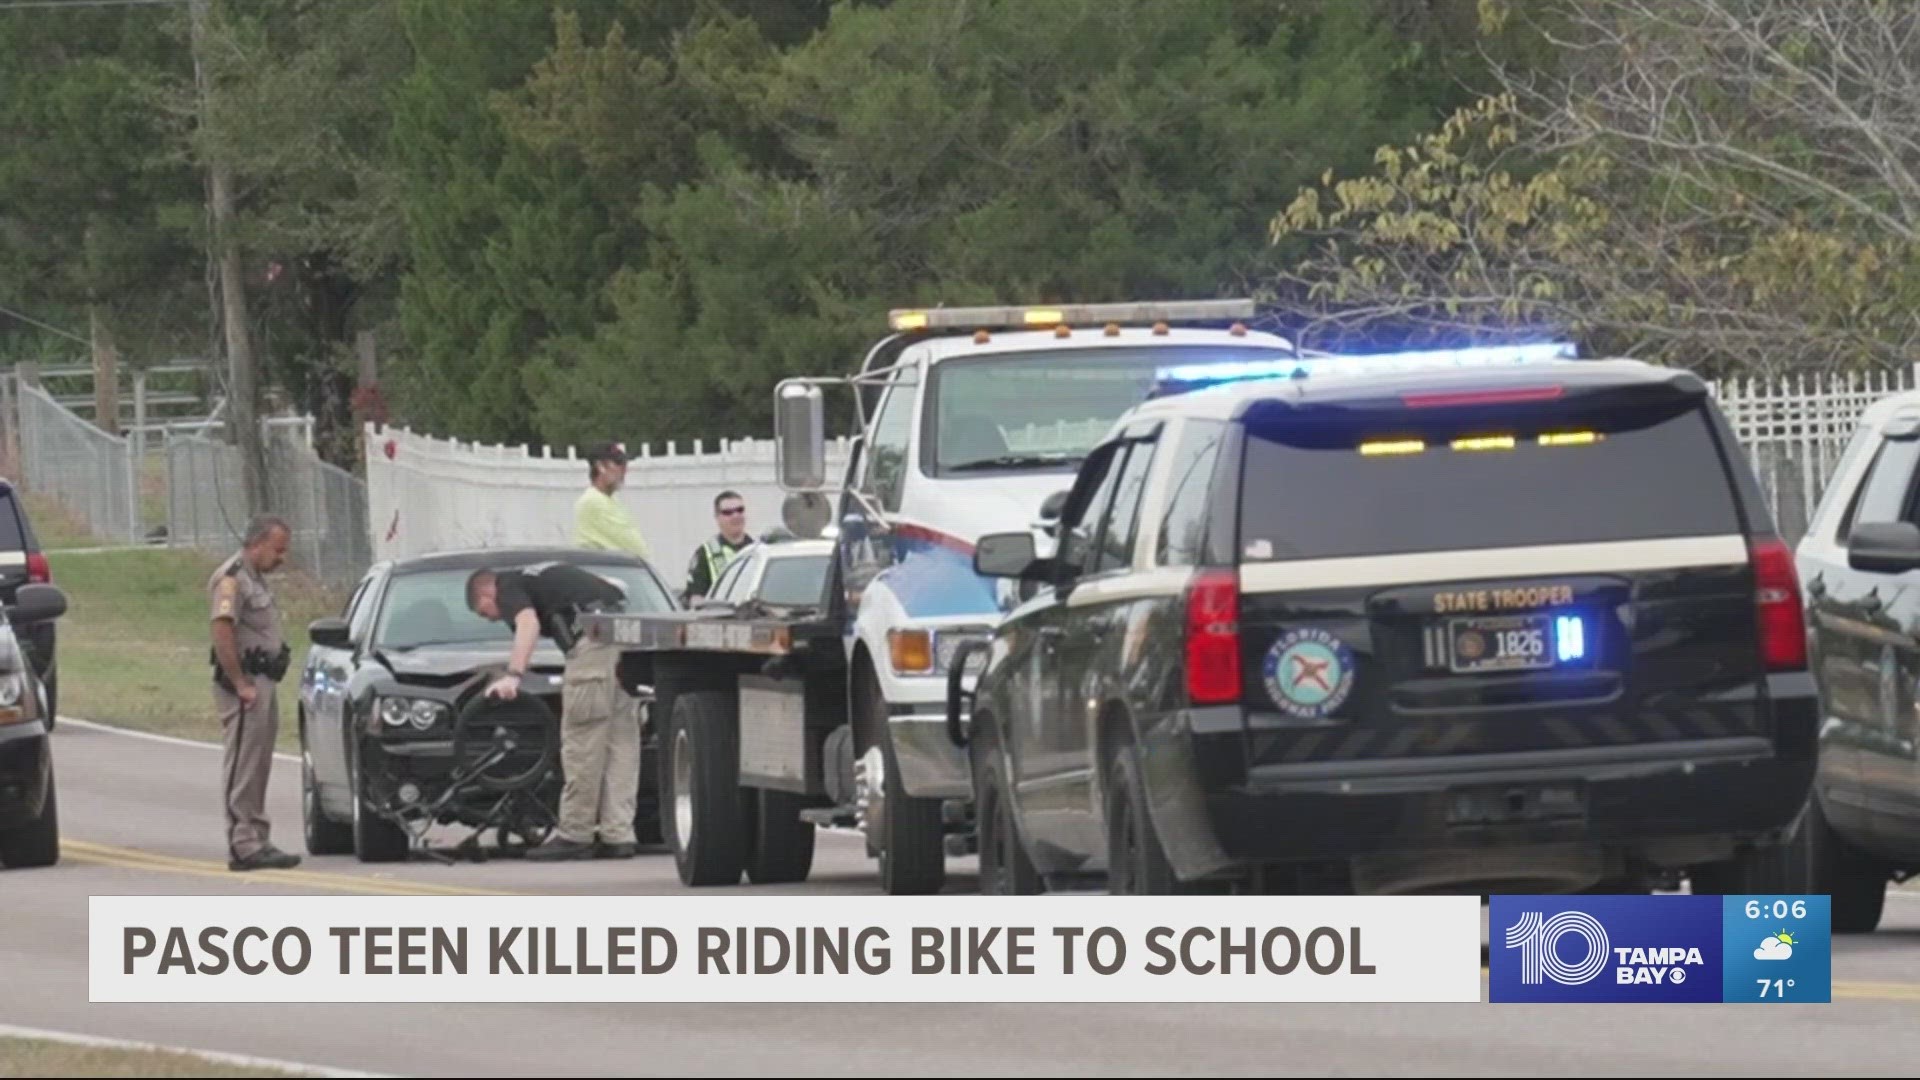 Troopers say the teen wasn't wearing a helmet at the time of the crash.